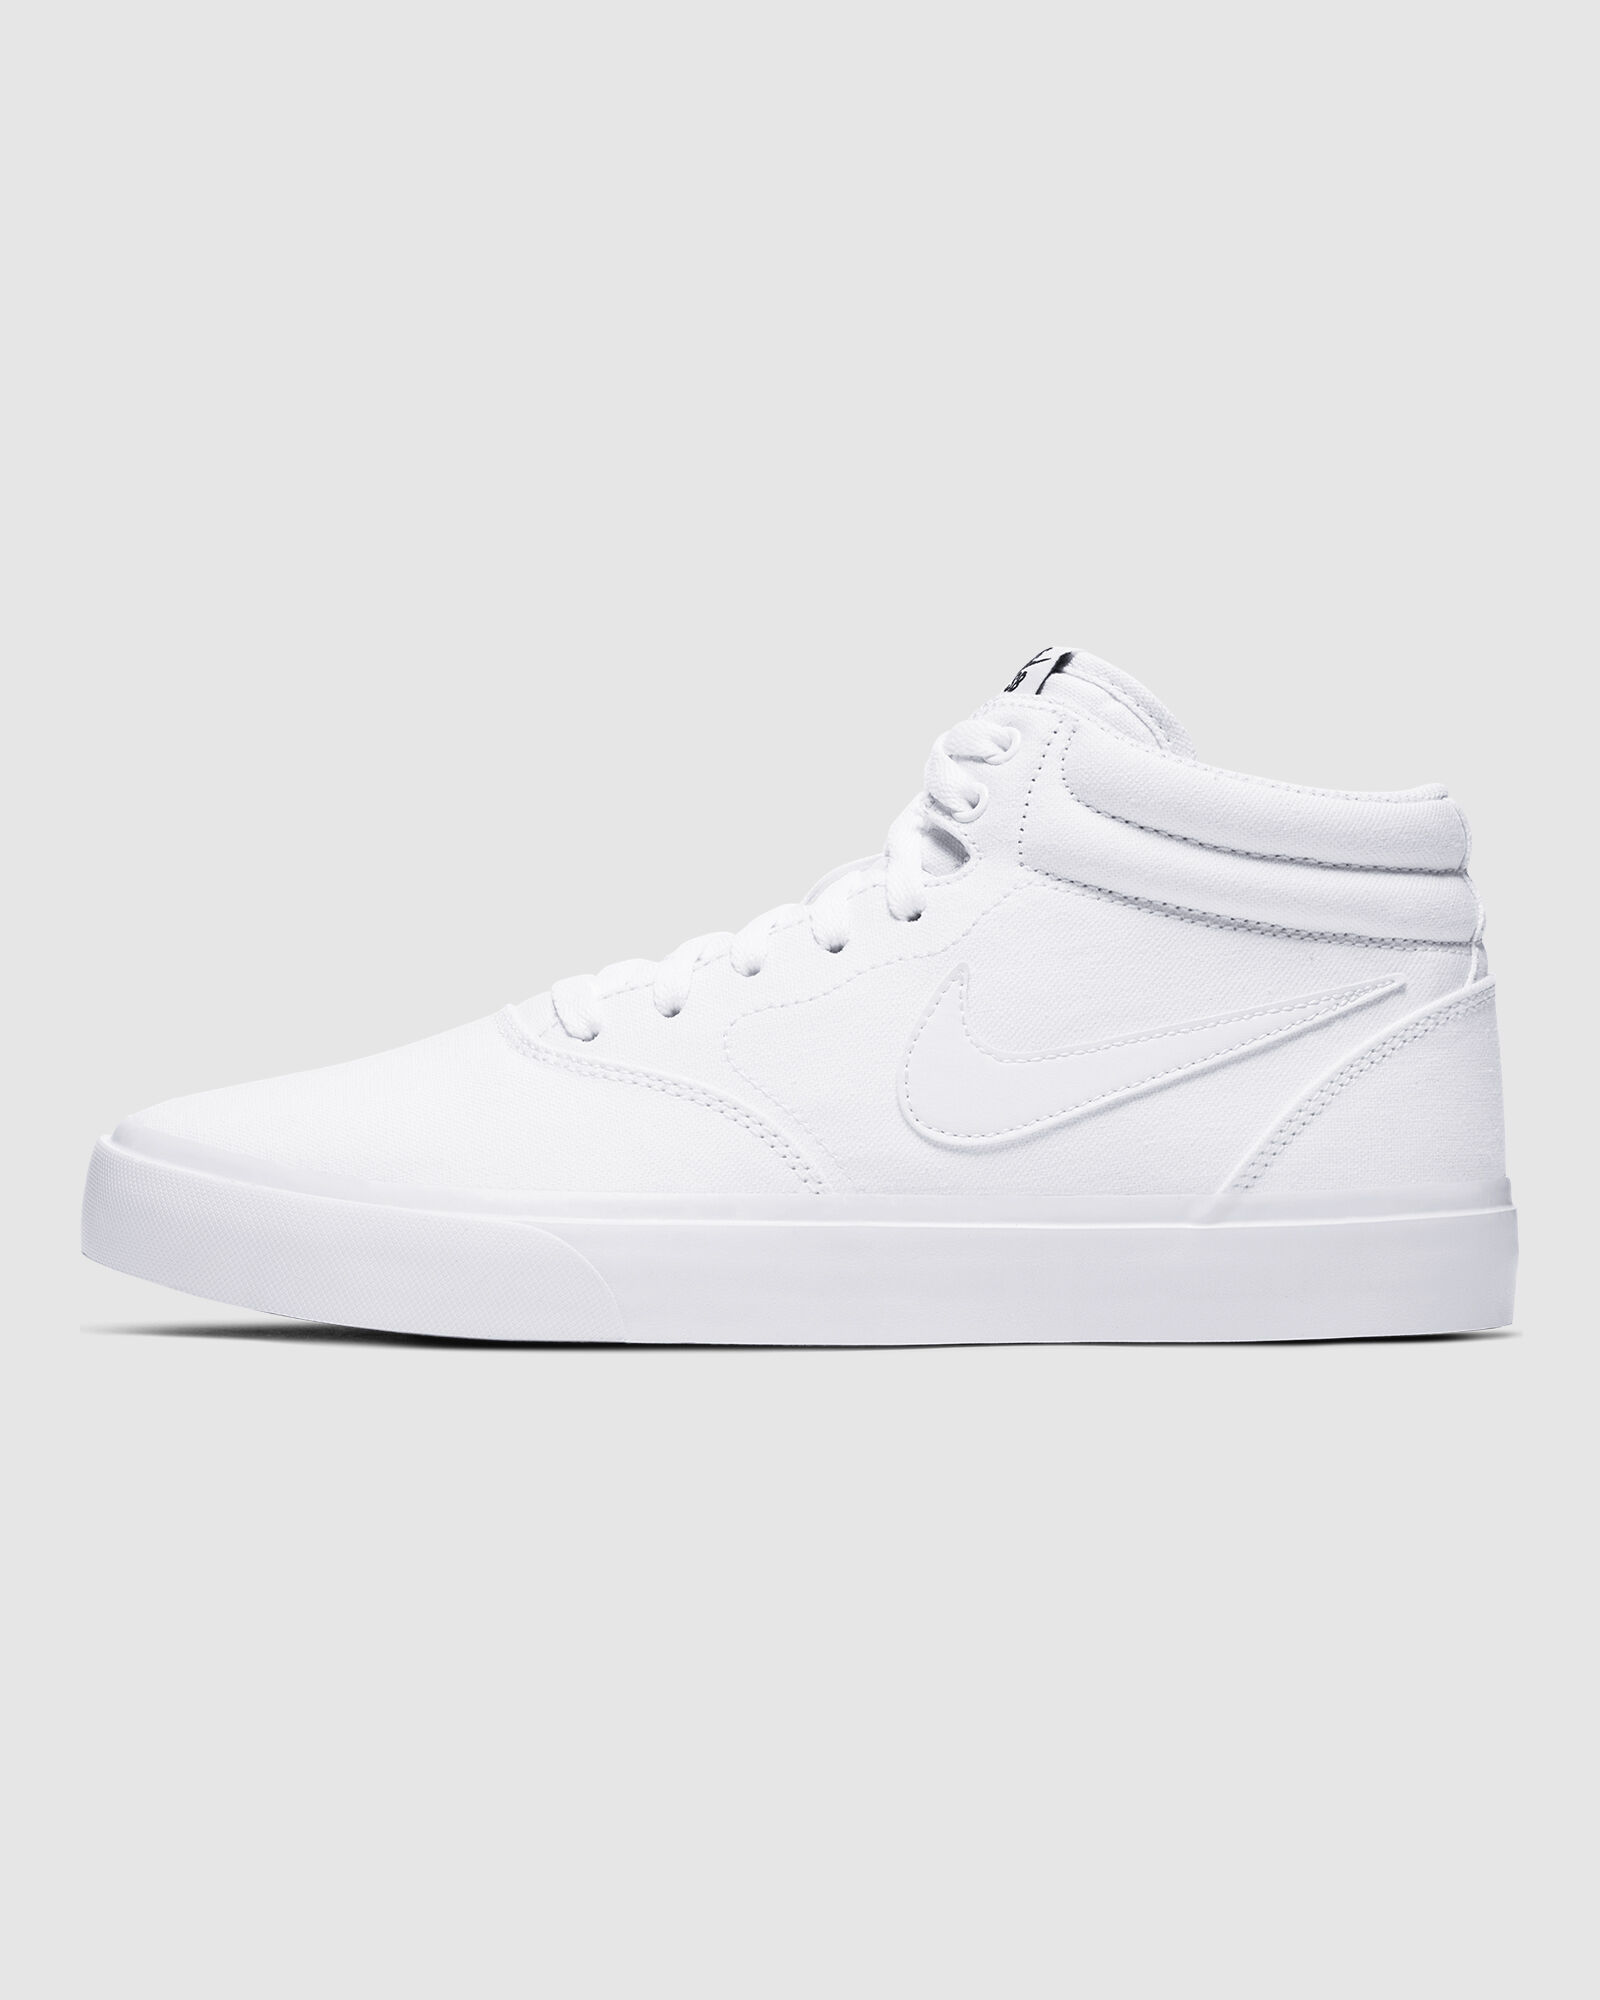 nike sb charge mid canvas white